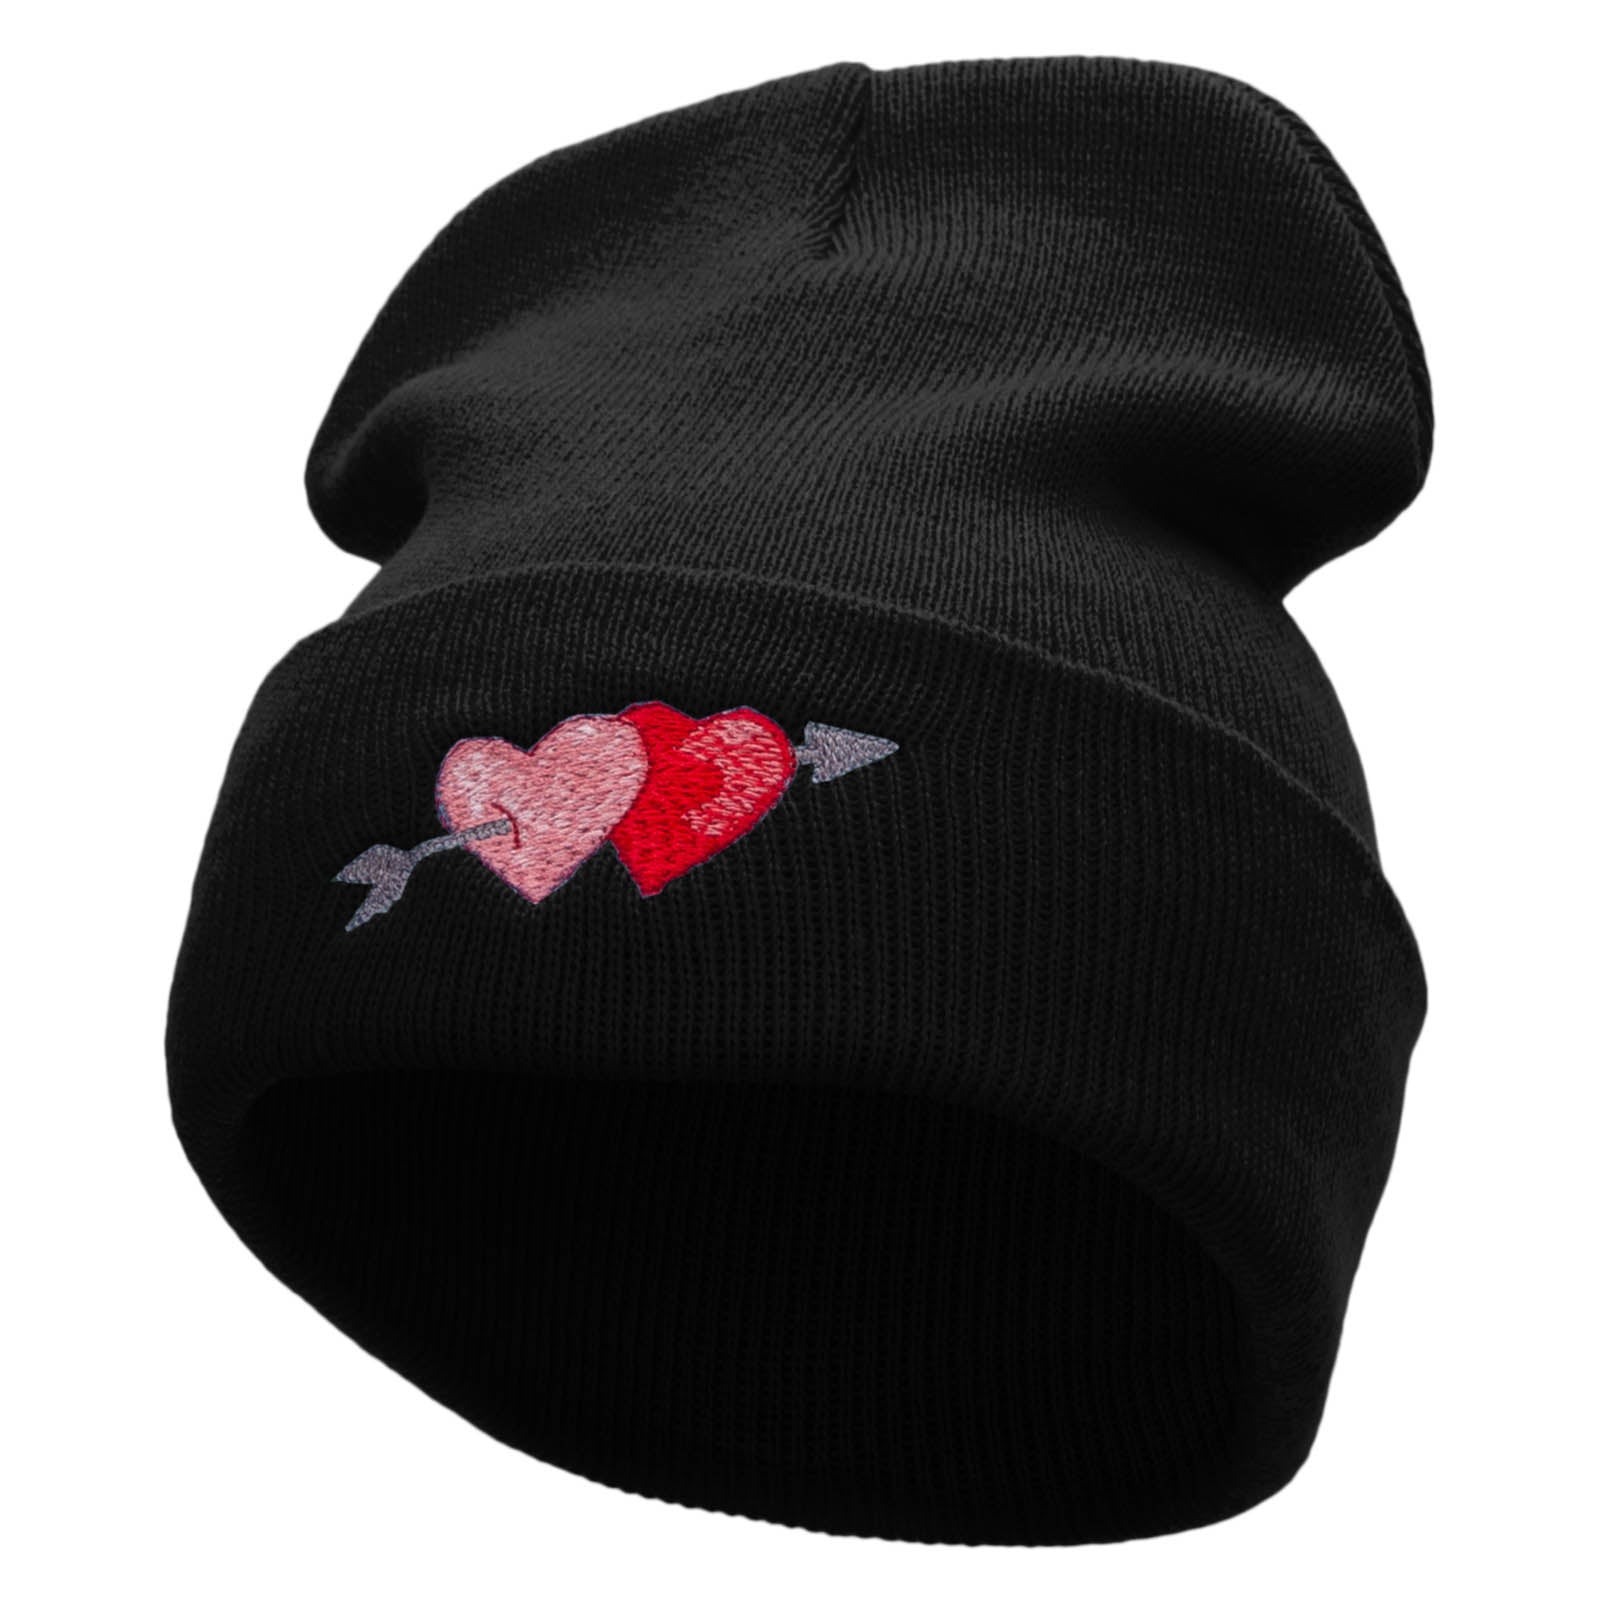 Arrow and Heart Embroidered 12 Inch Solid Long Beanie Made in USA - Black OSFM